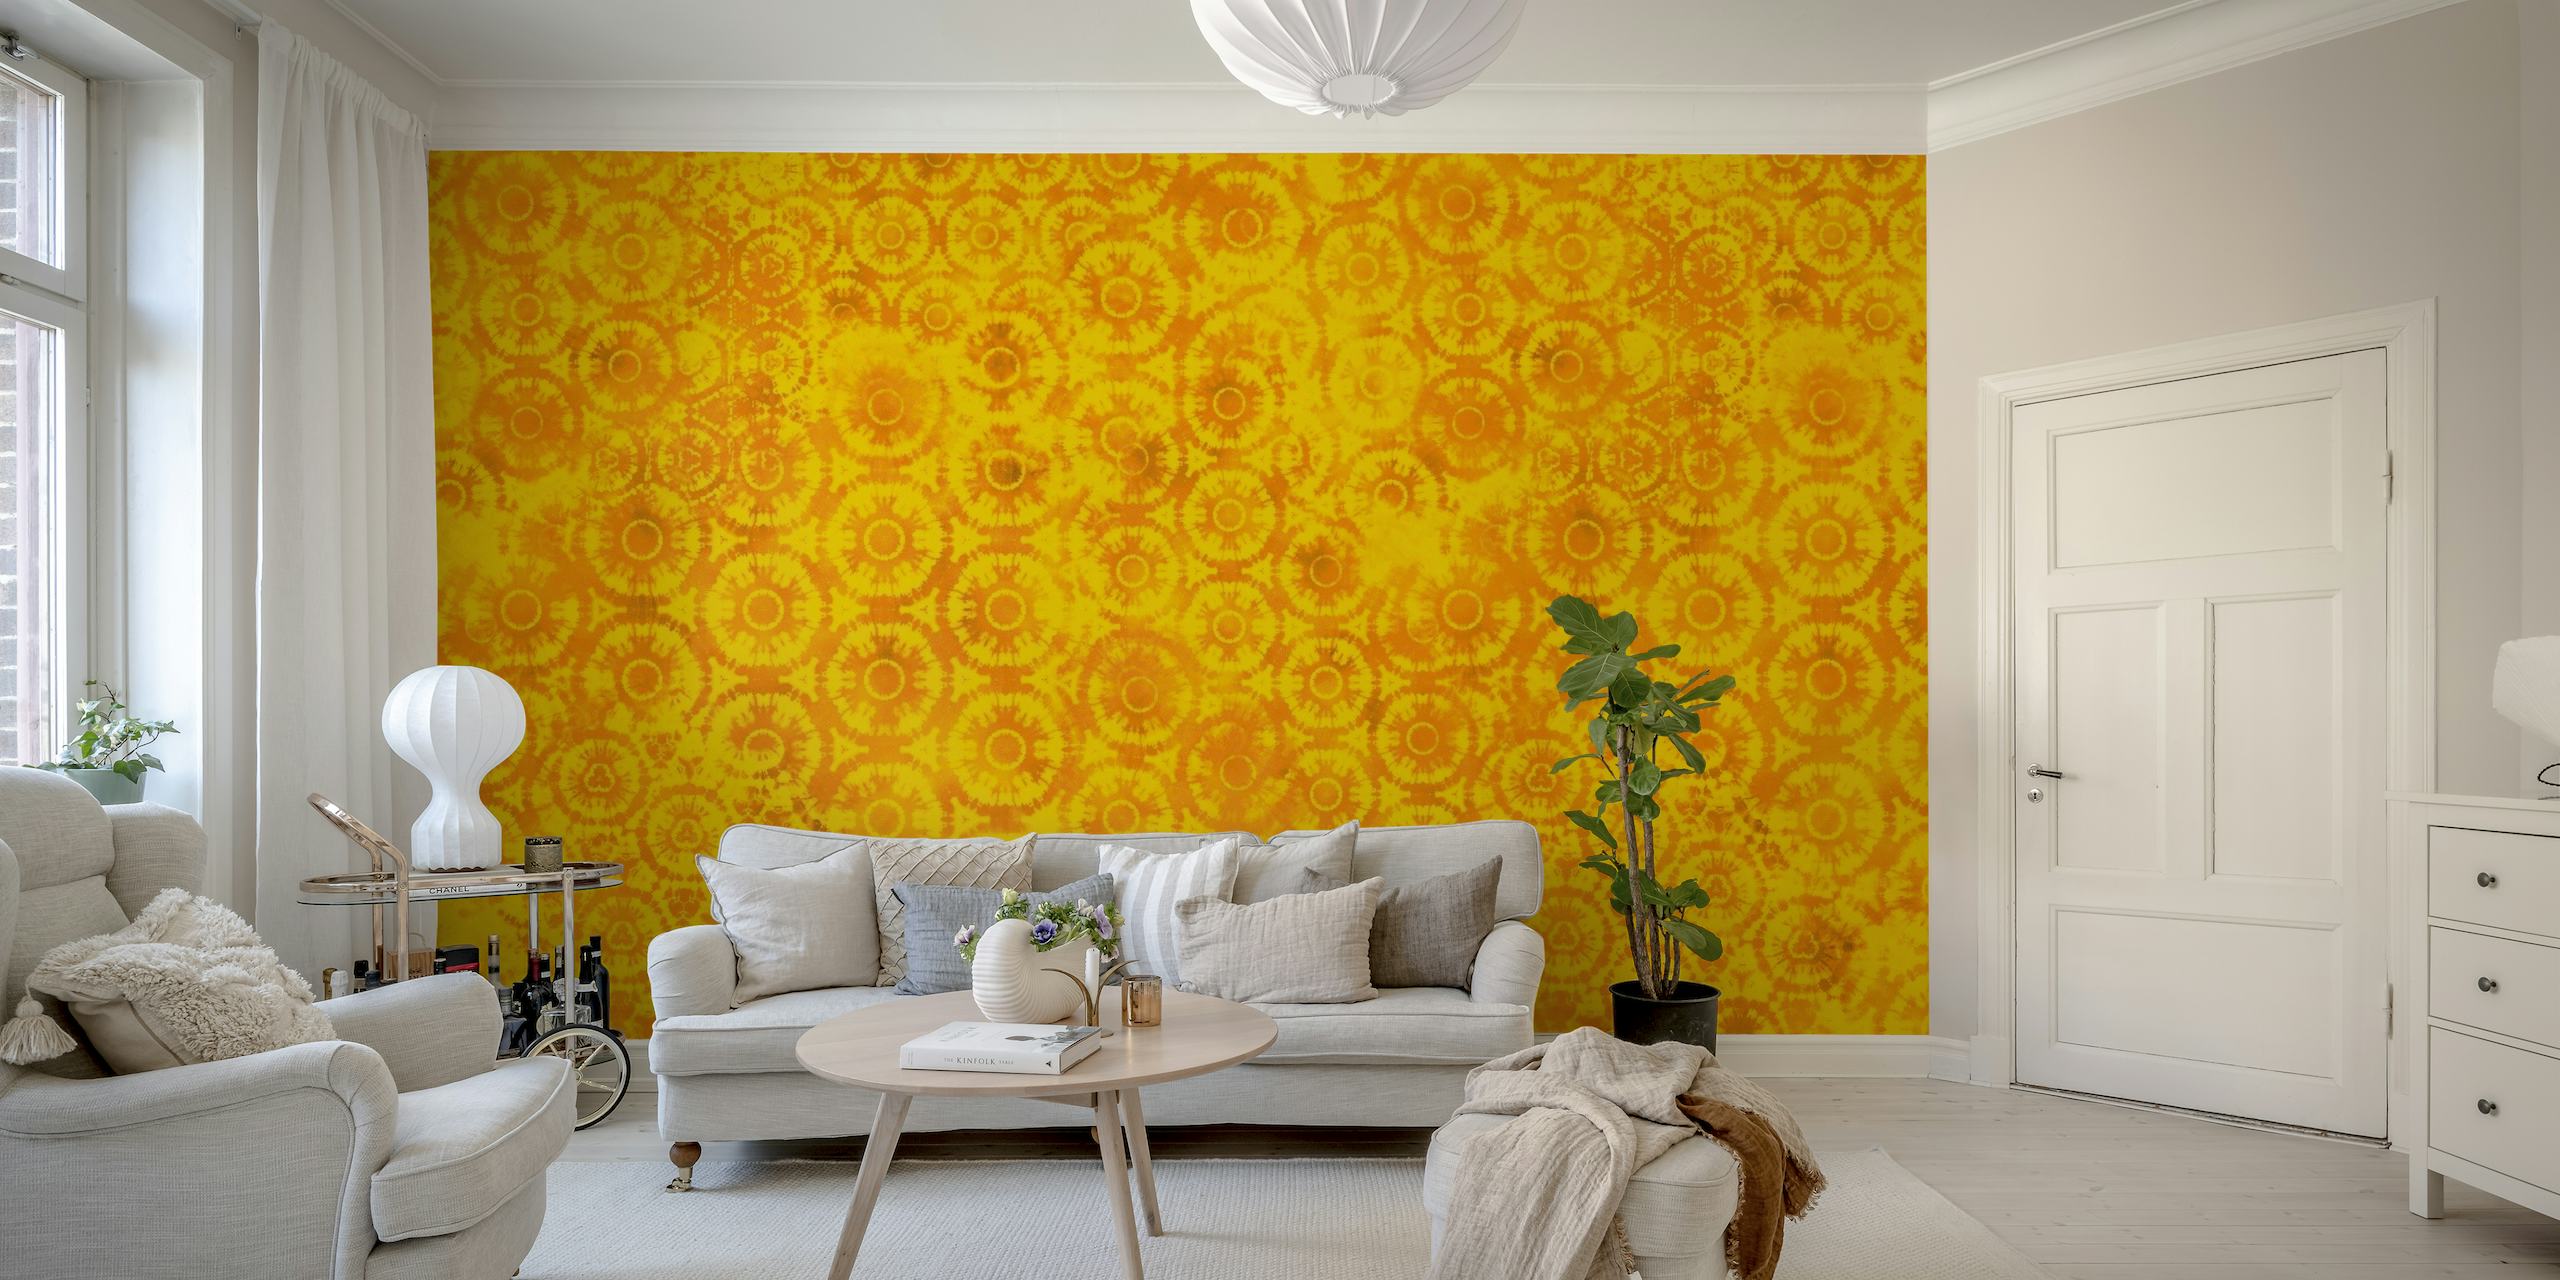 Yellow and Blue Tie-Dye Wallpaper - Happywall